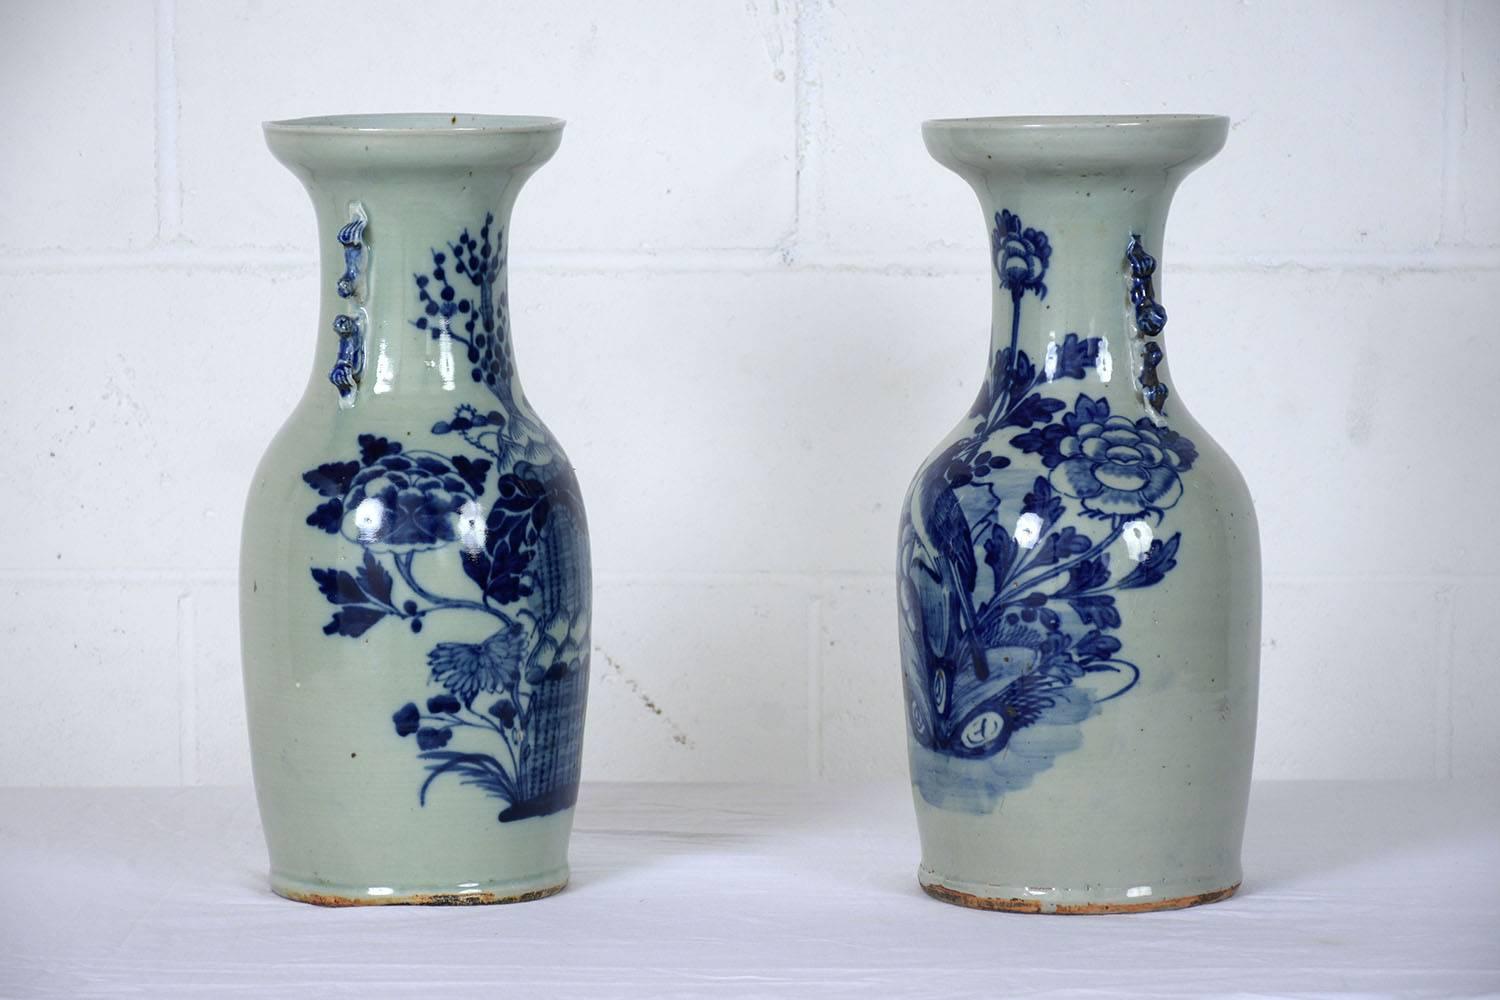 This Pair of 1930s Chinese vases are made of ceramic with a white and blue color finish. Adorning the vases are scenes of gardens with flowers, leaves, trees, and even a bird. This pair of vases is sturdy, stunning, and ready to decorate any room